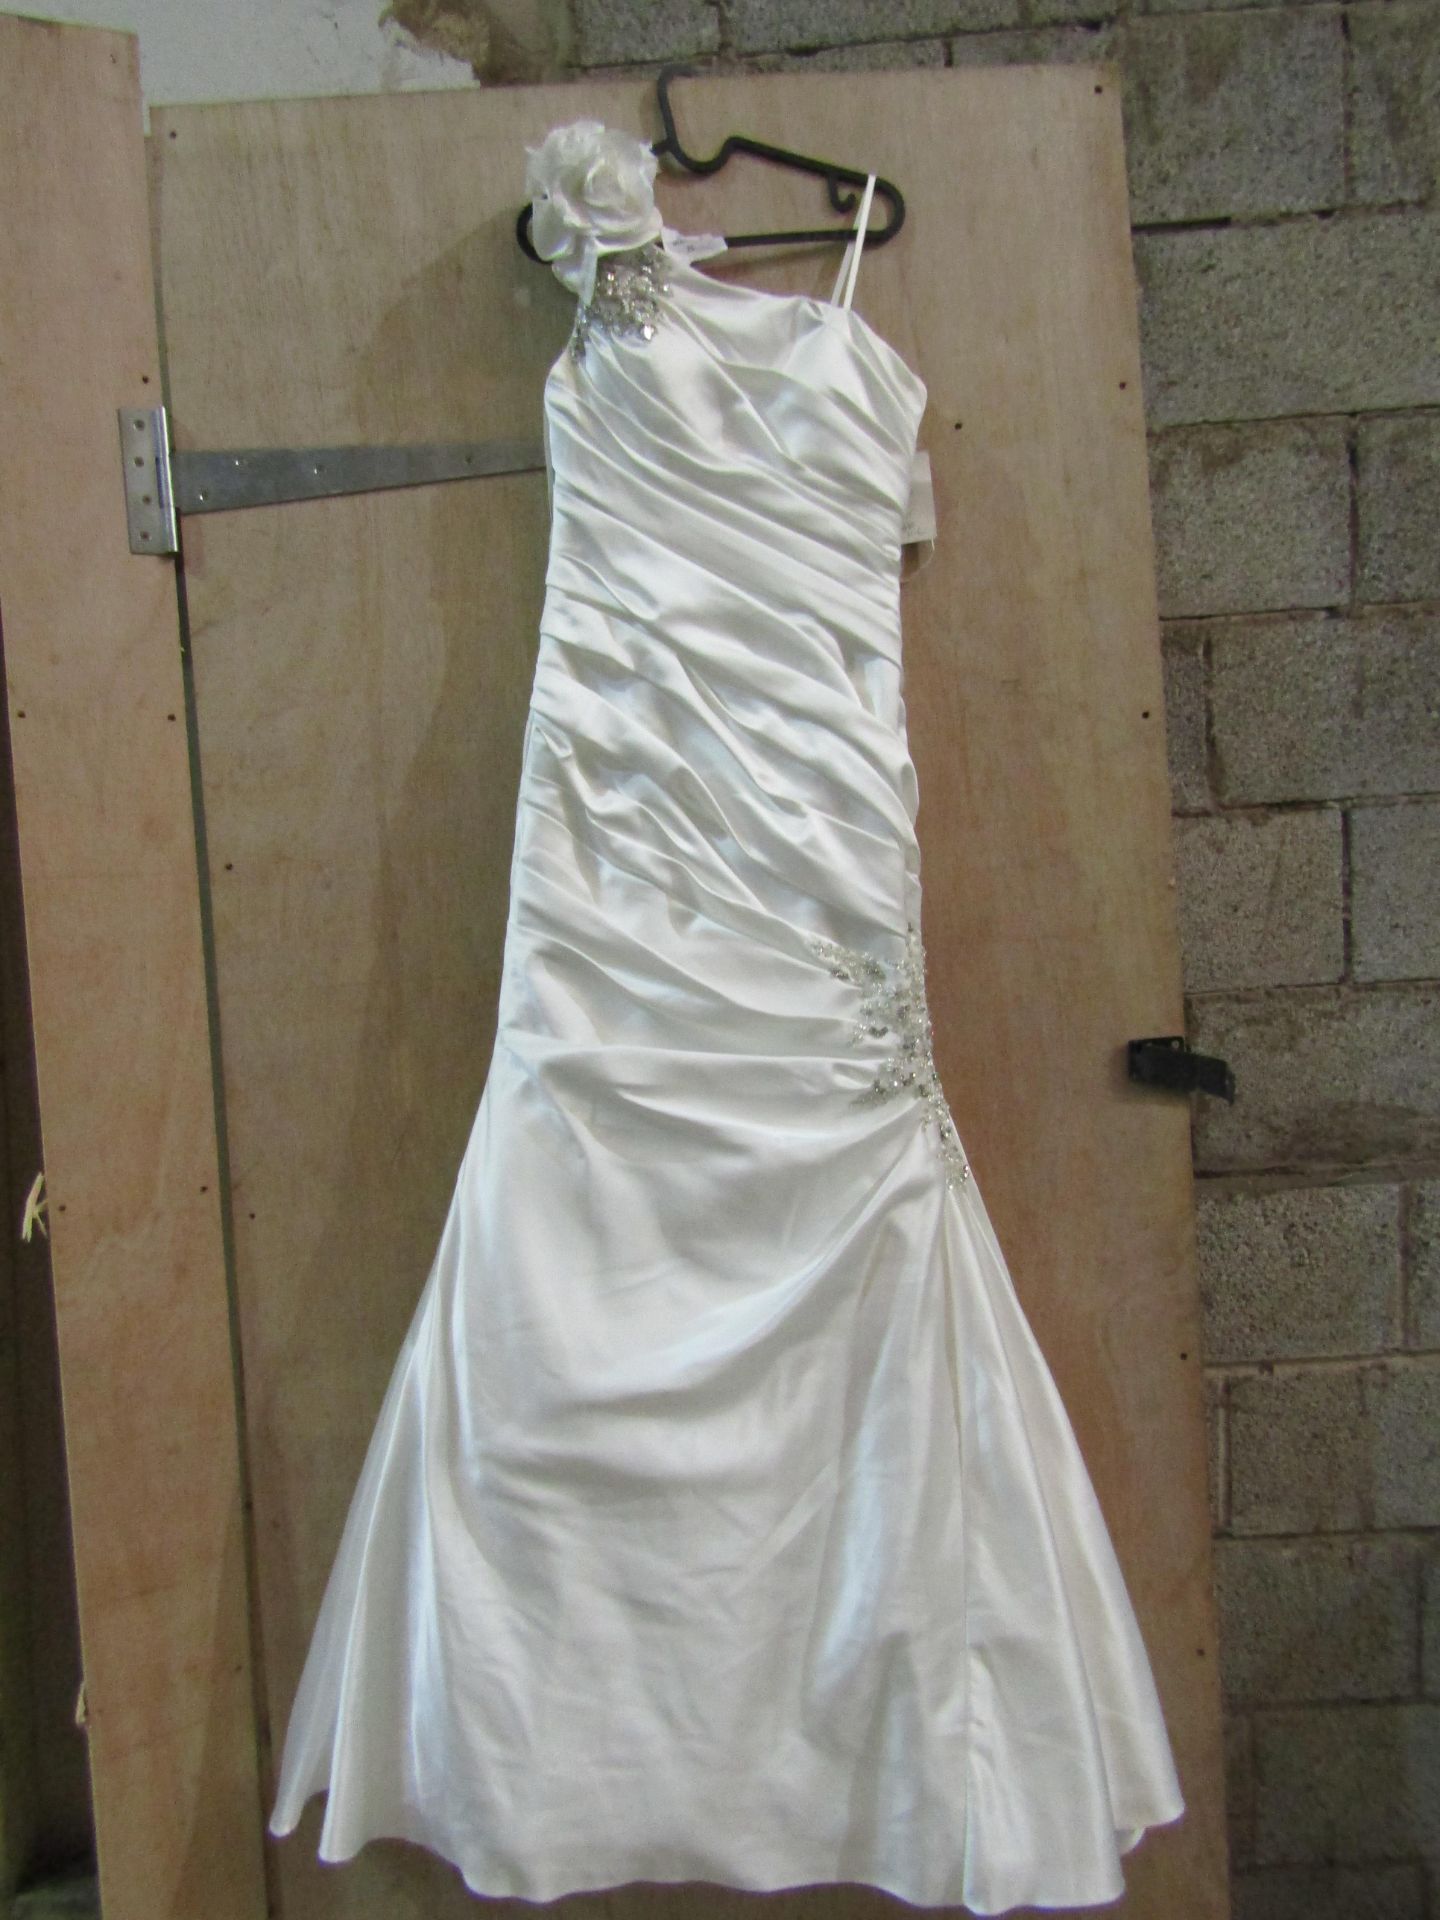 Approx 500 pieces of wedding shop stock to include wedding dresses, mother of the bride, dresses, - Image 23 of 43